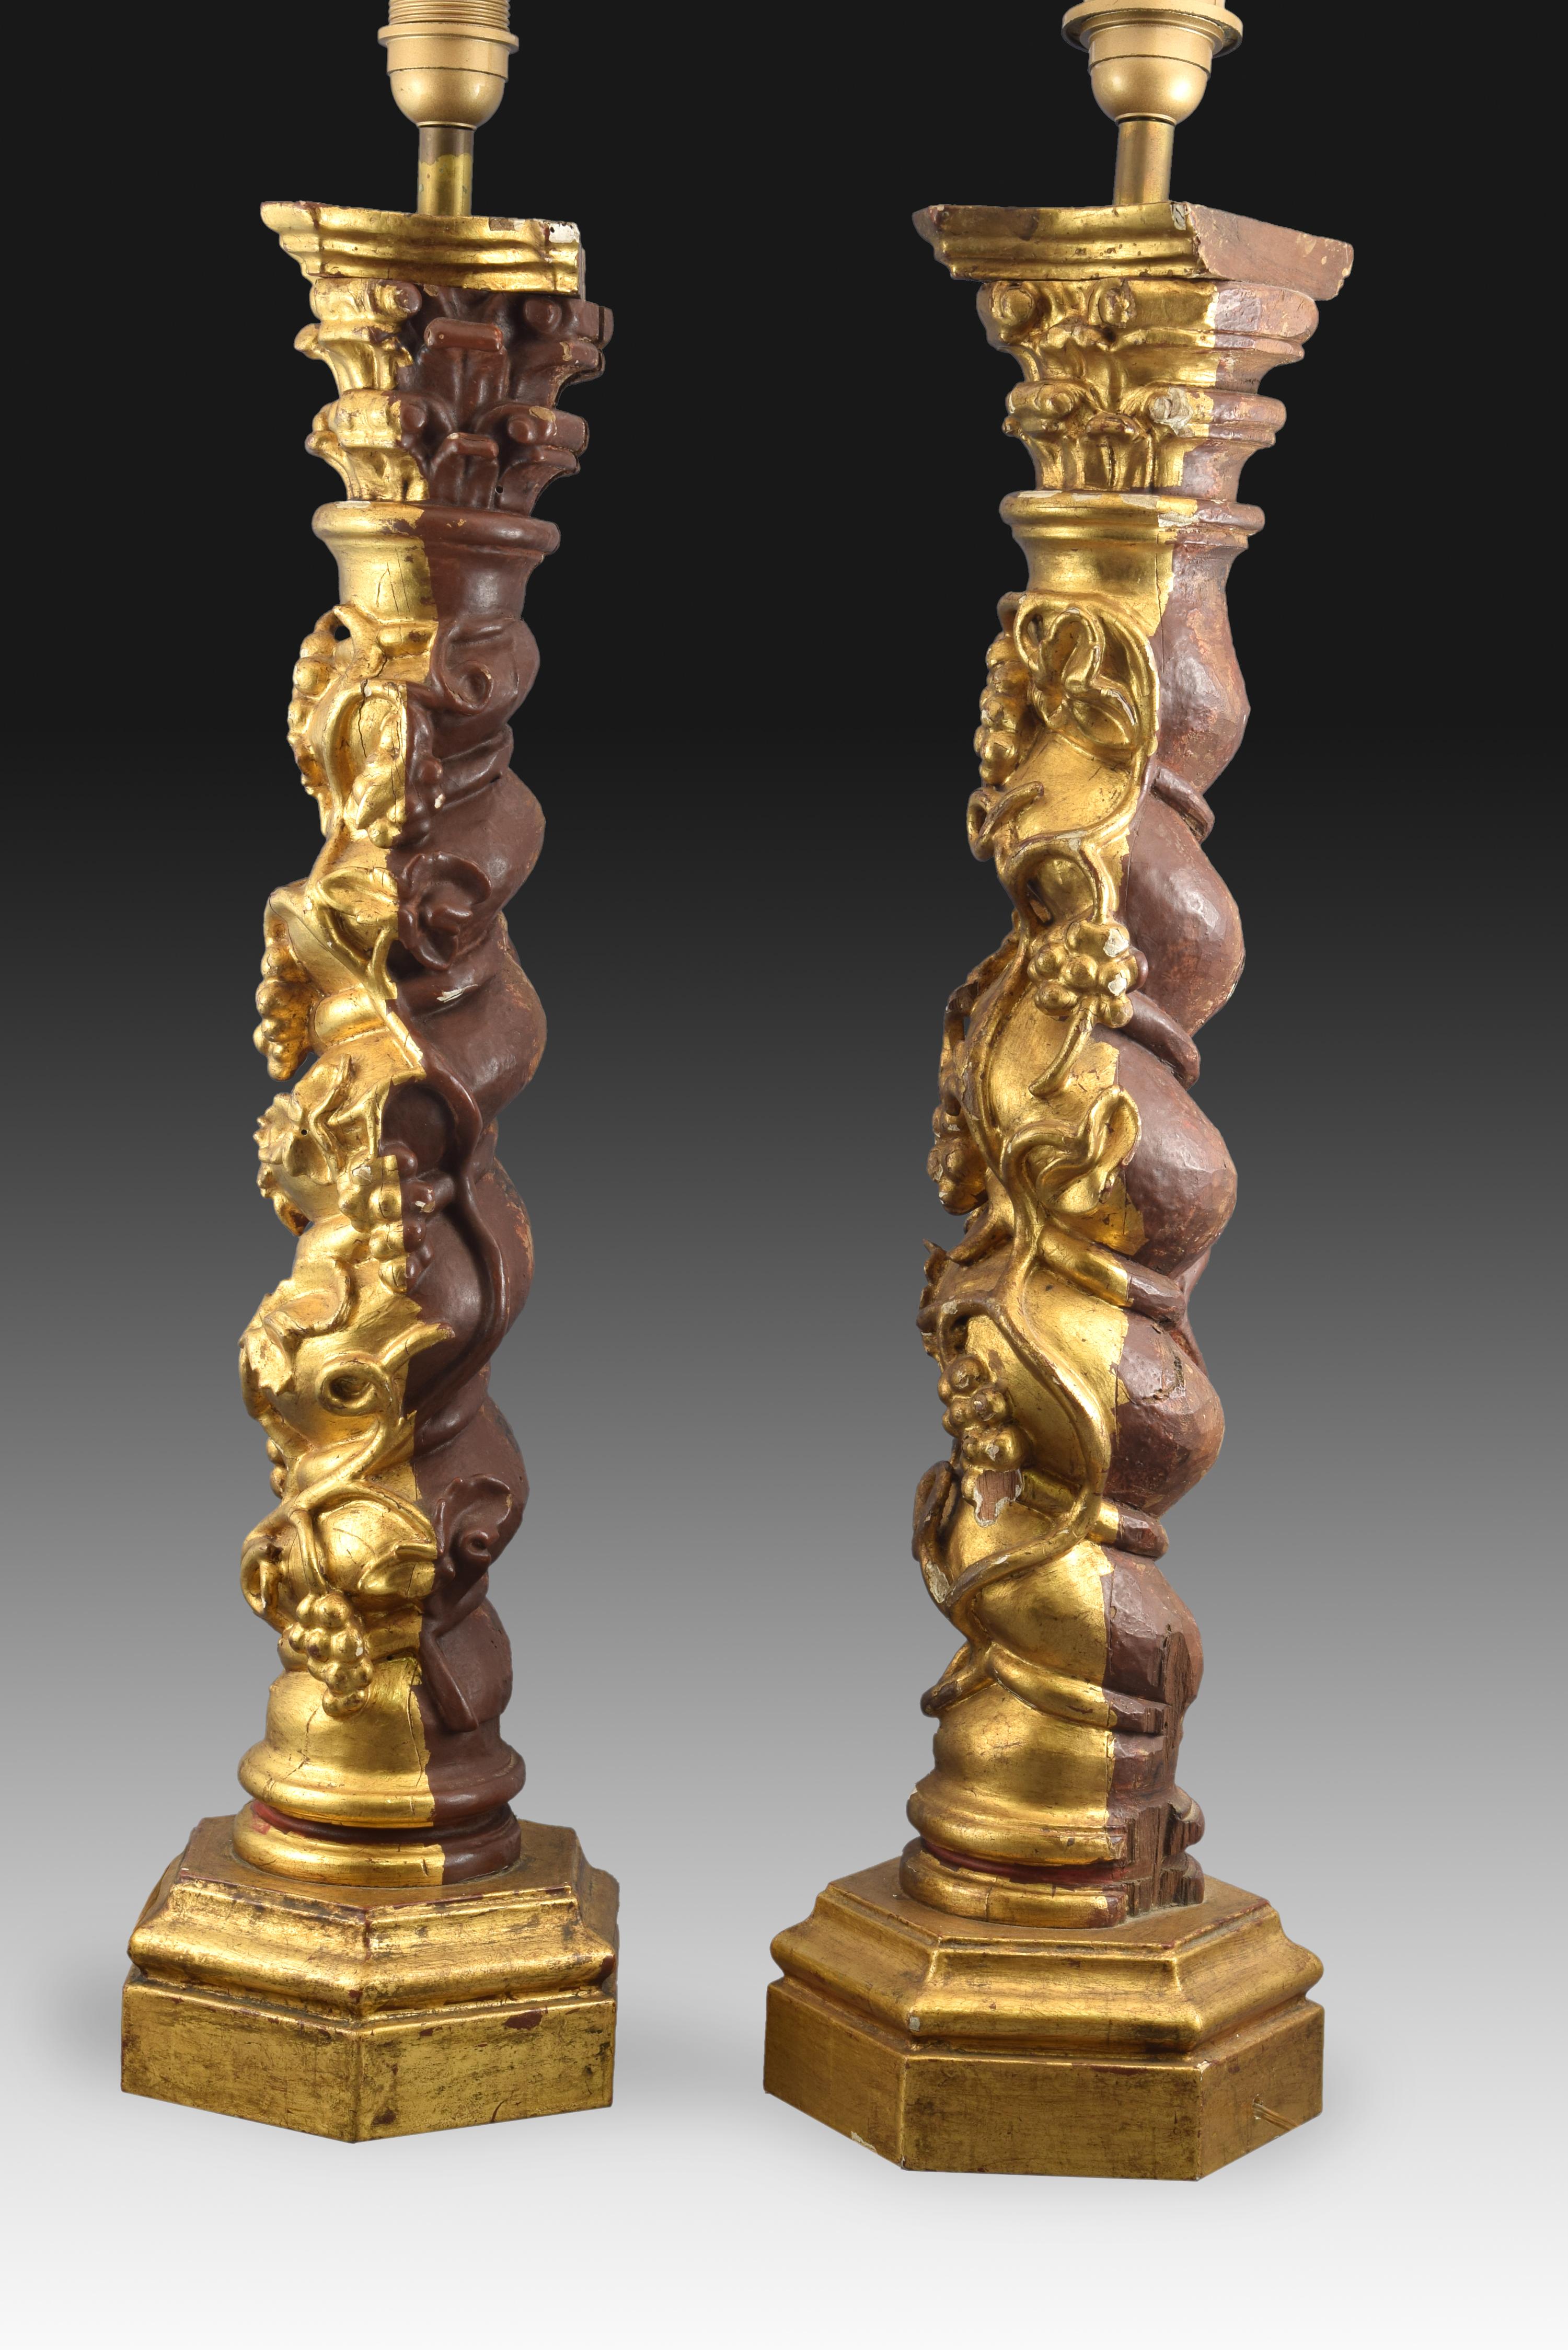 Other Pair of Table Lamps Made of Solomonic Columns, Wood and Metal, Late 17th Century